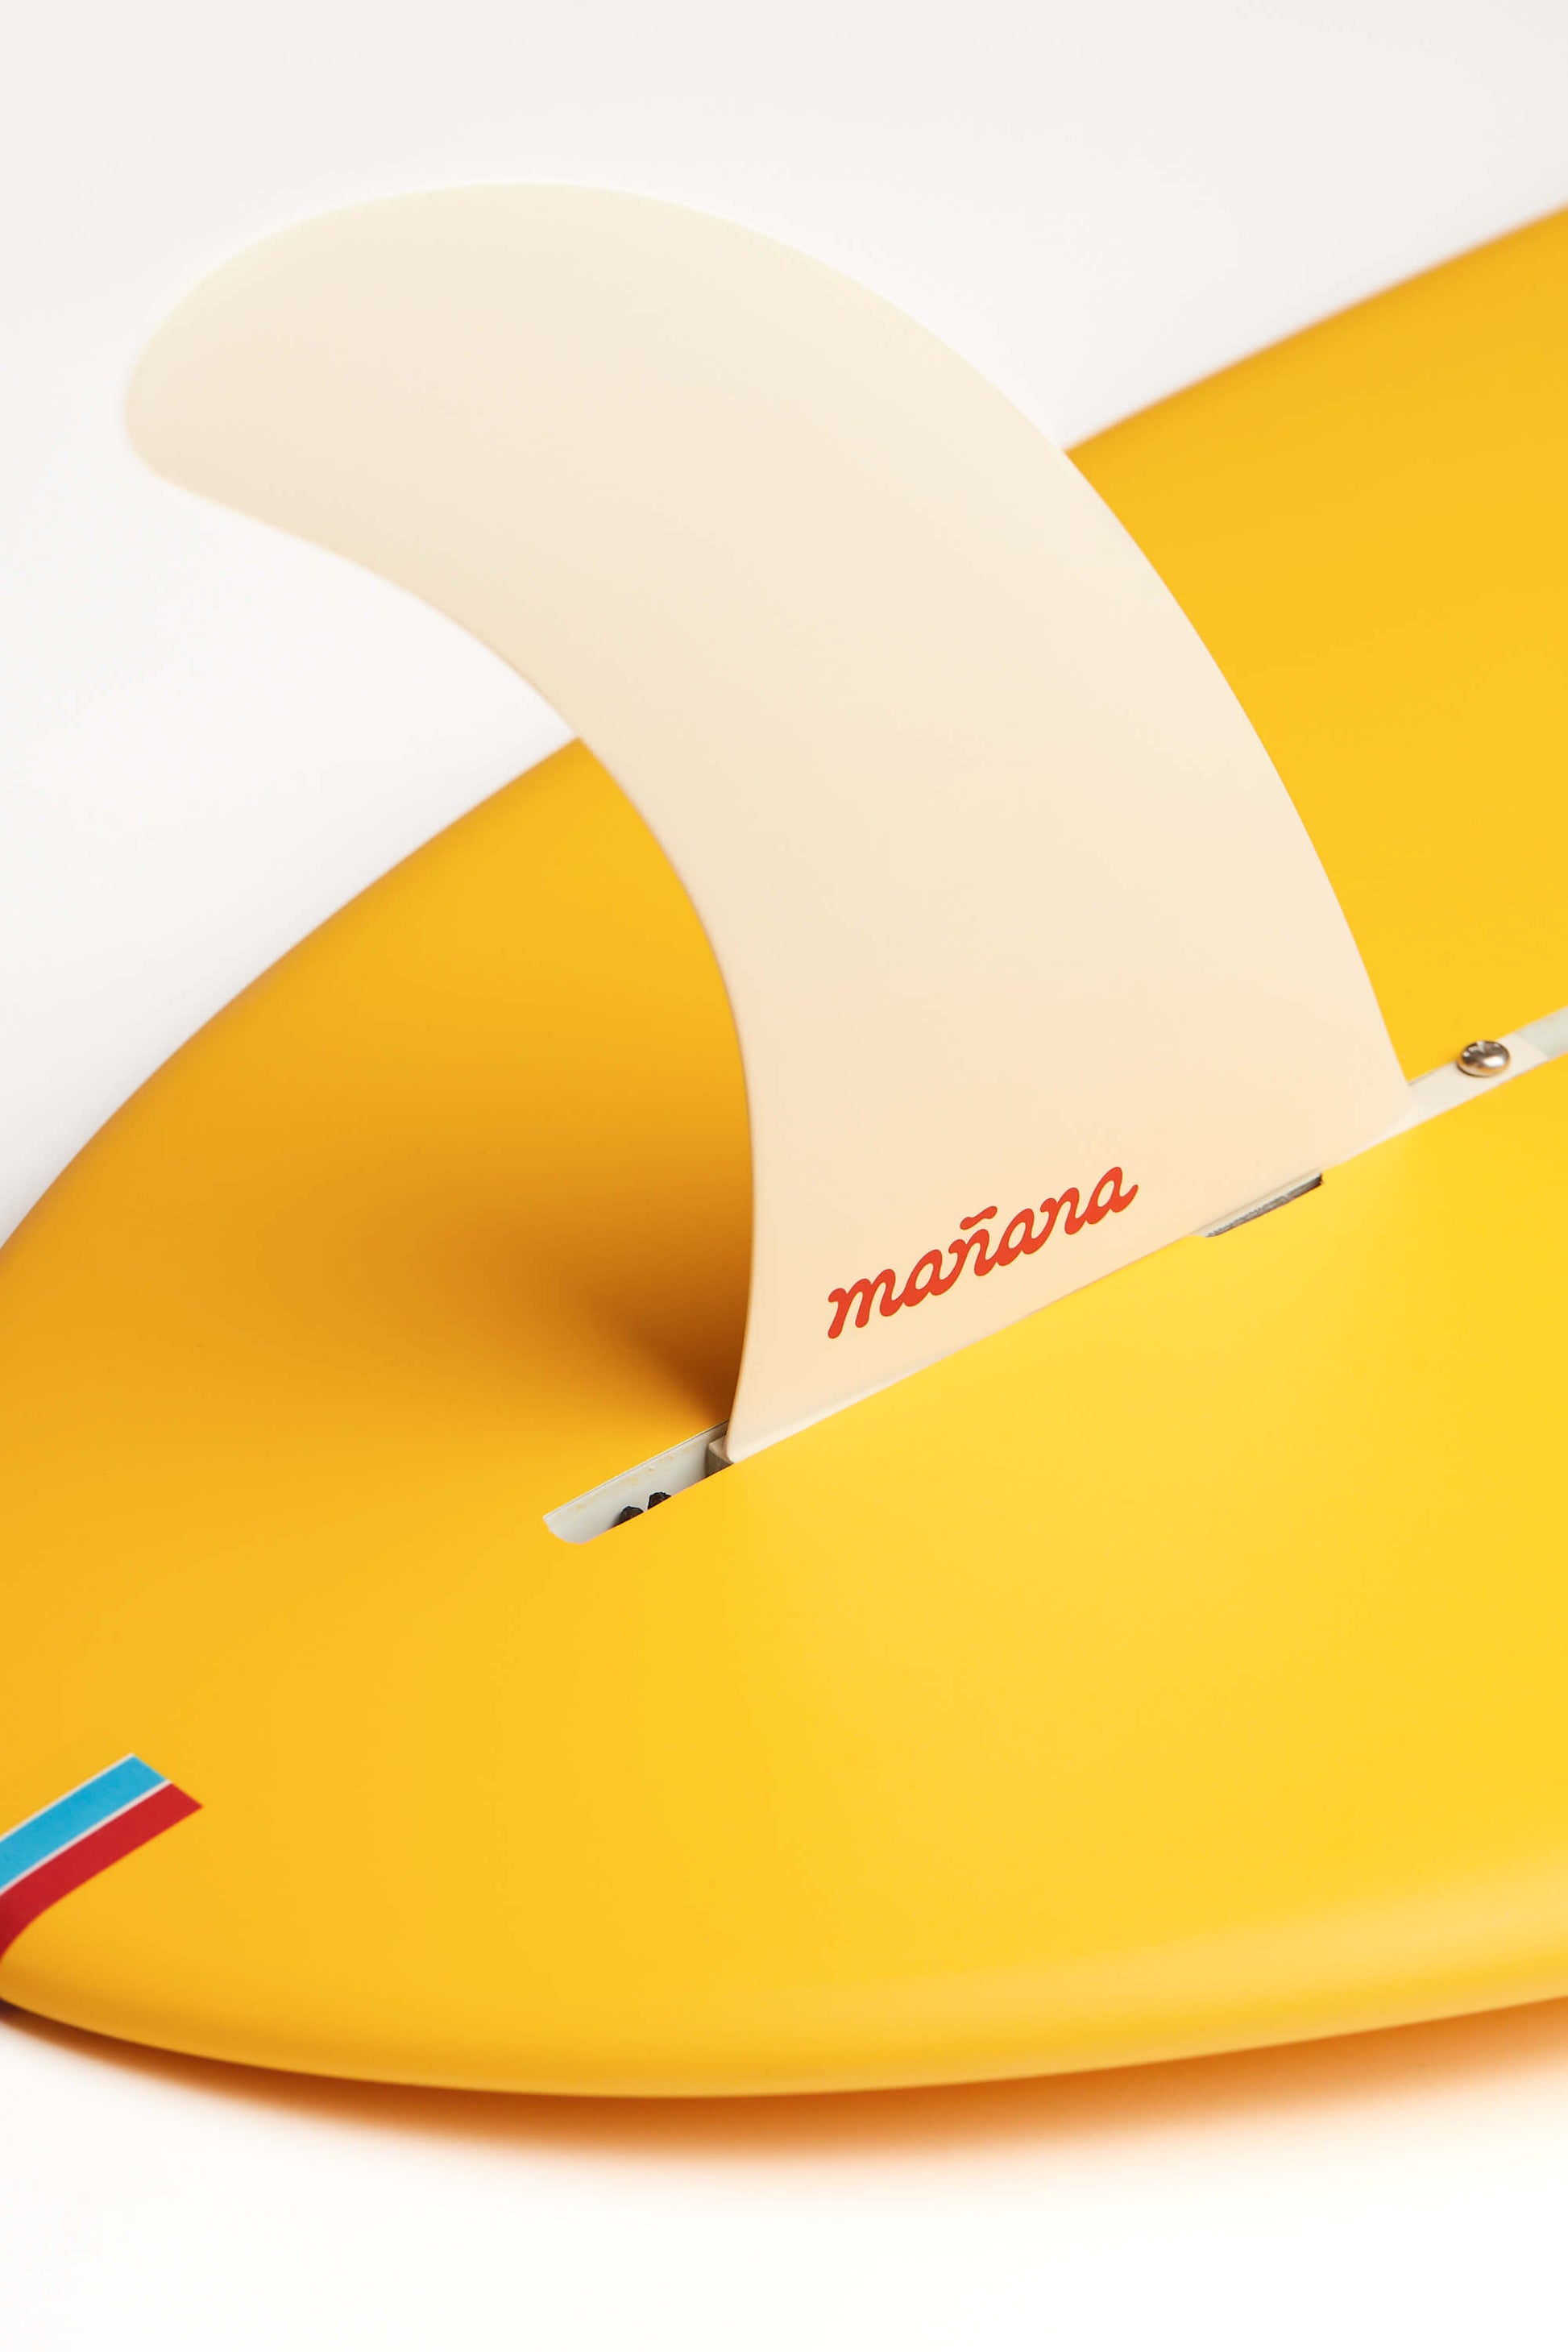 Pintail Surfboard - Yellow